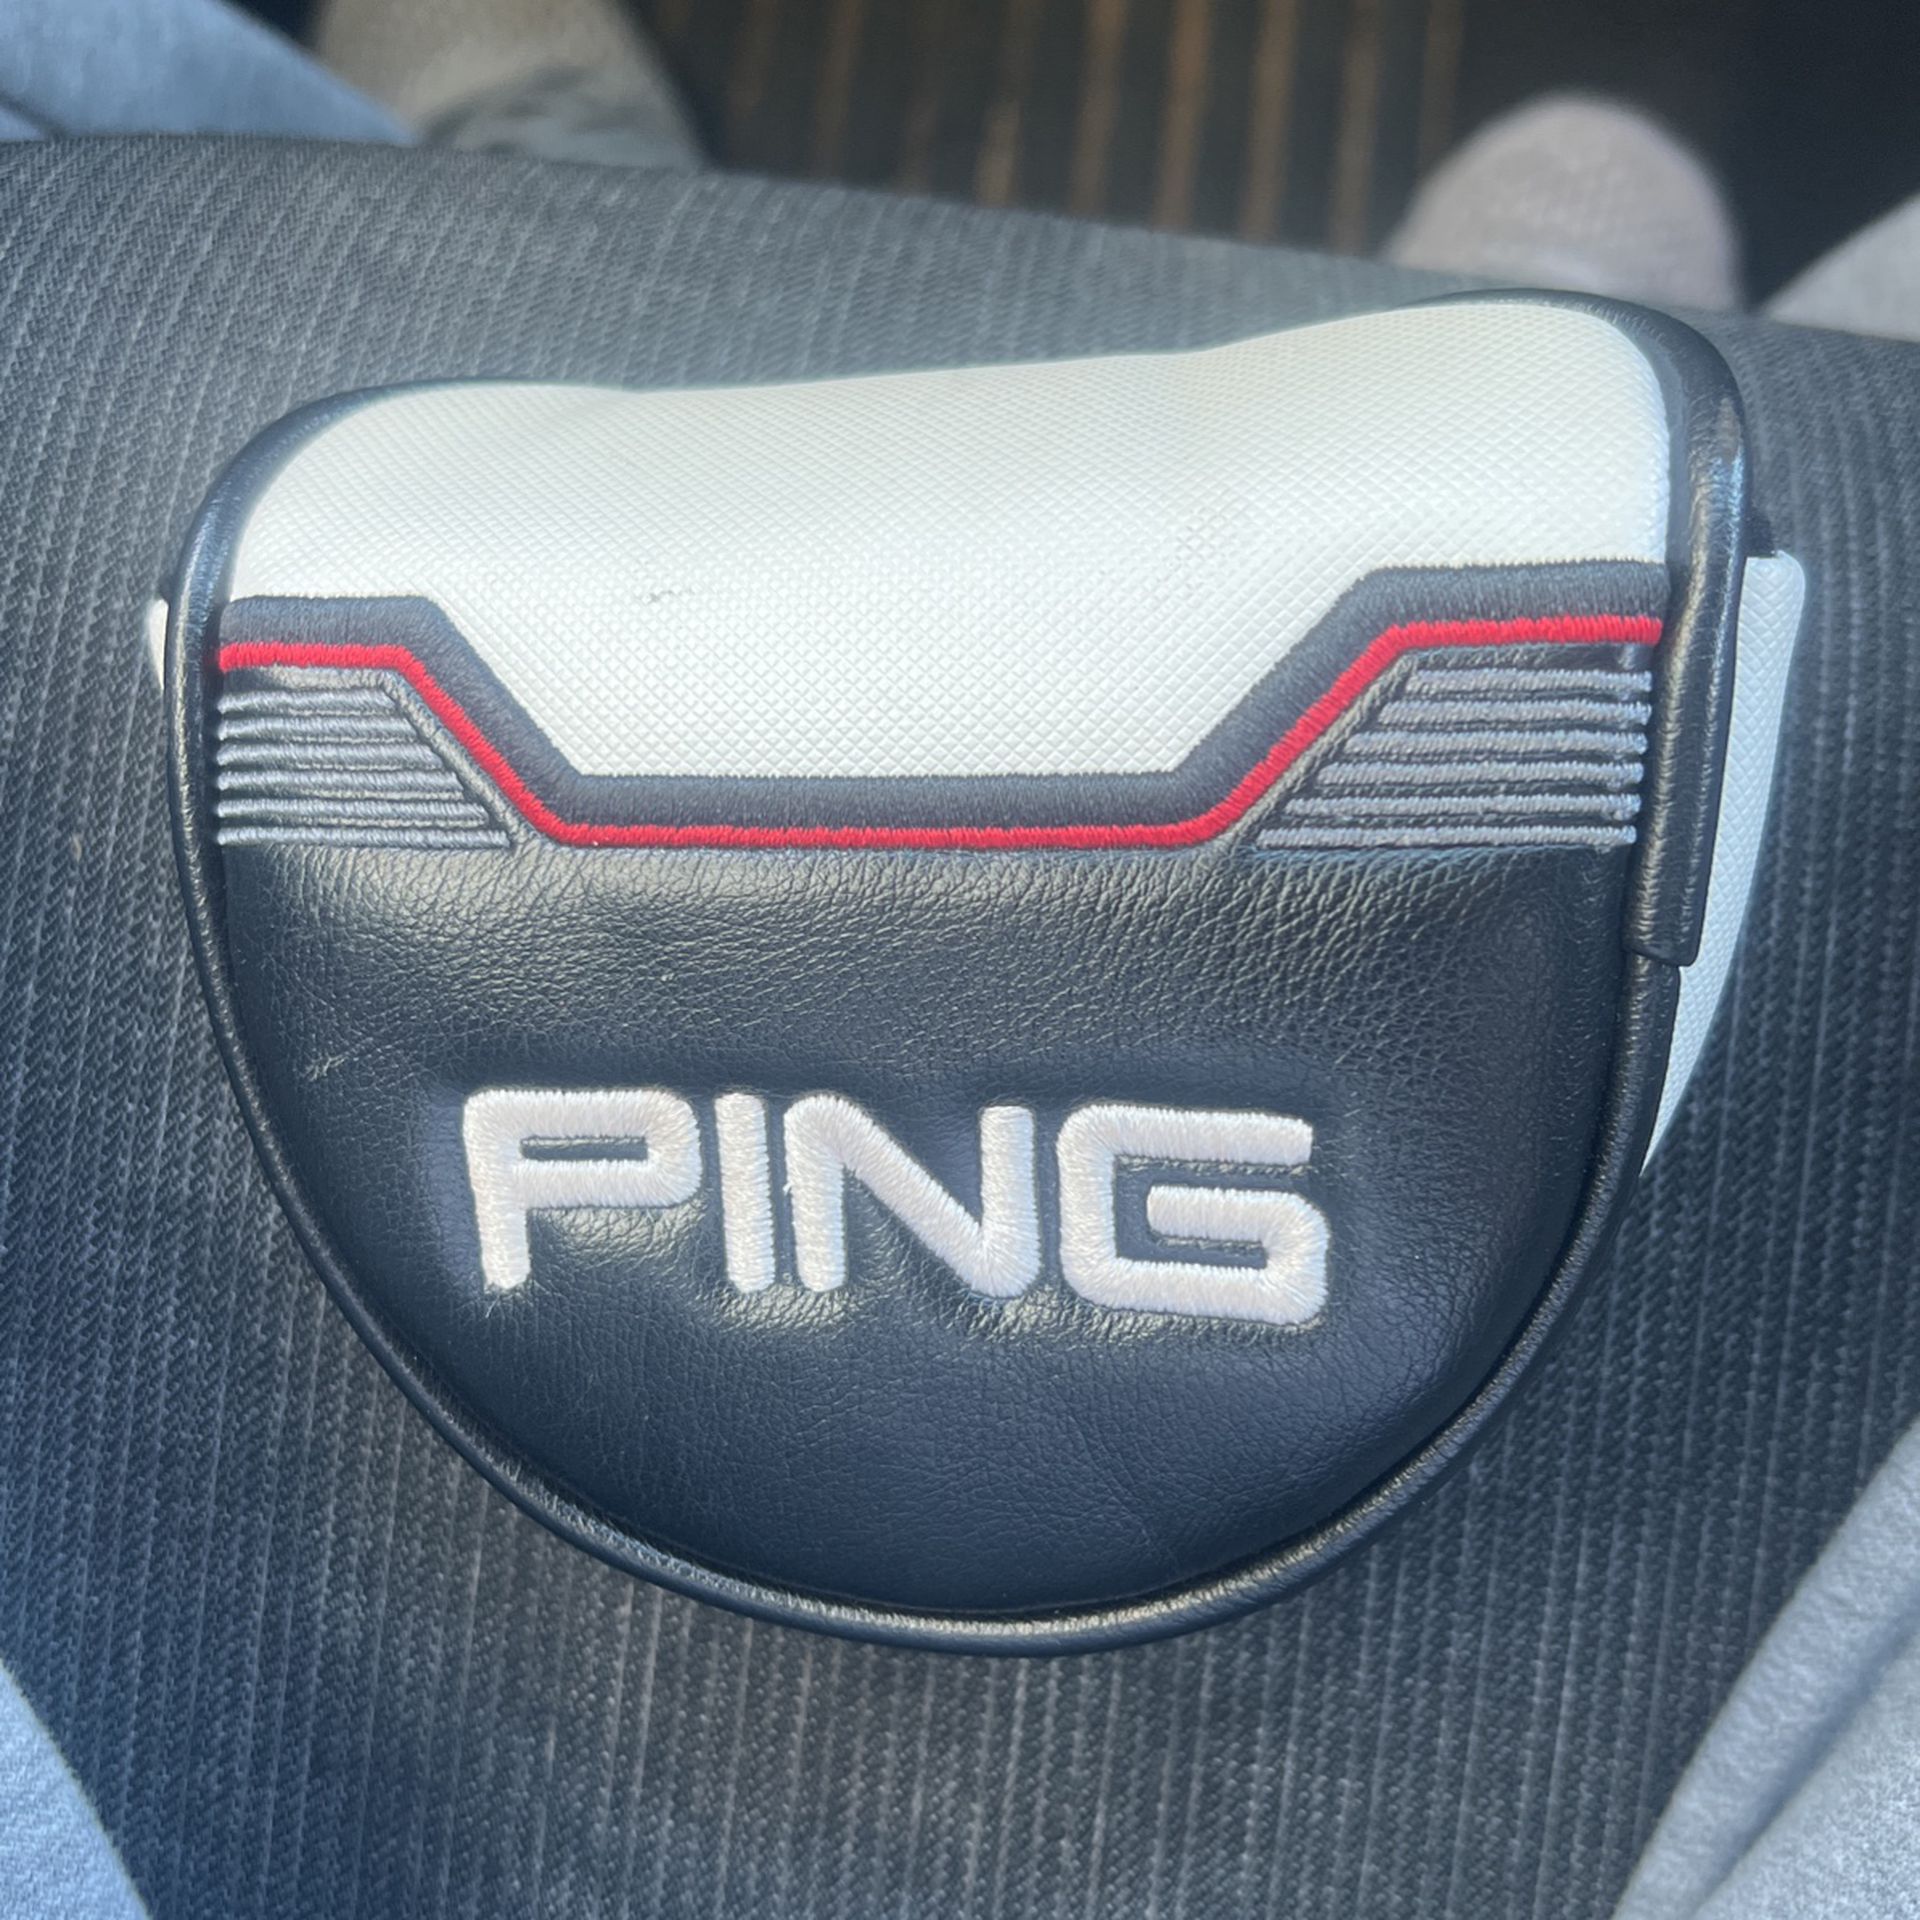 Mallet Putter Cover (Ping)